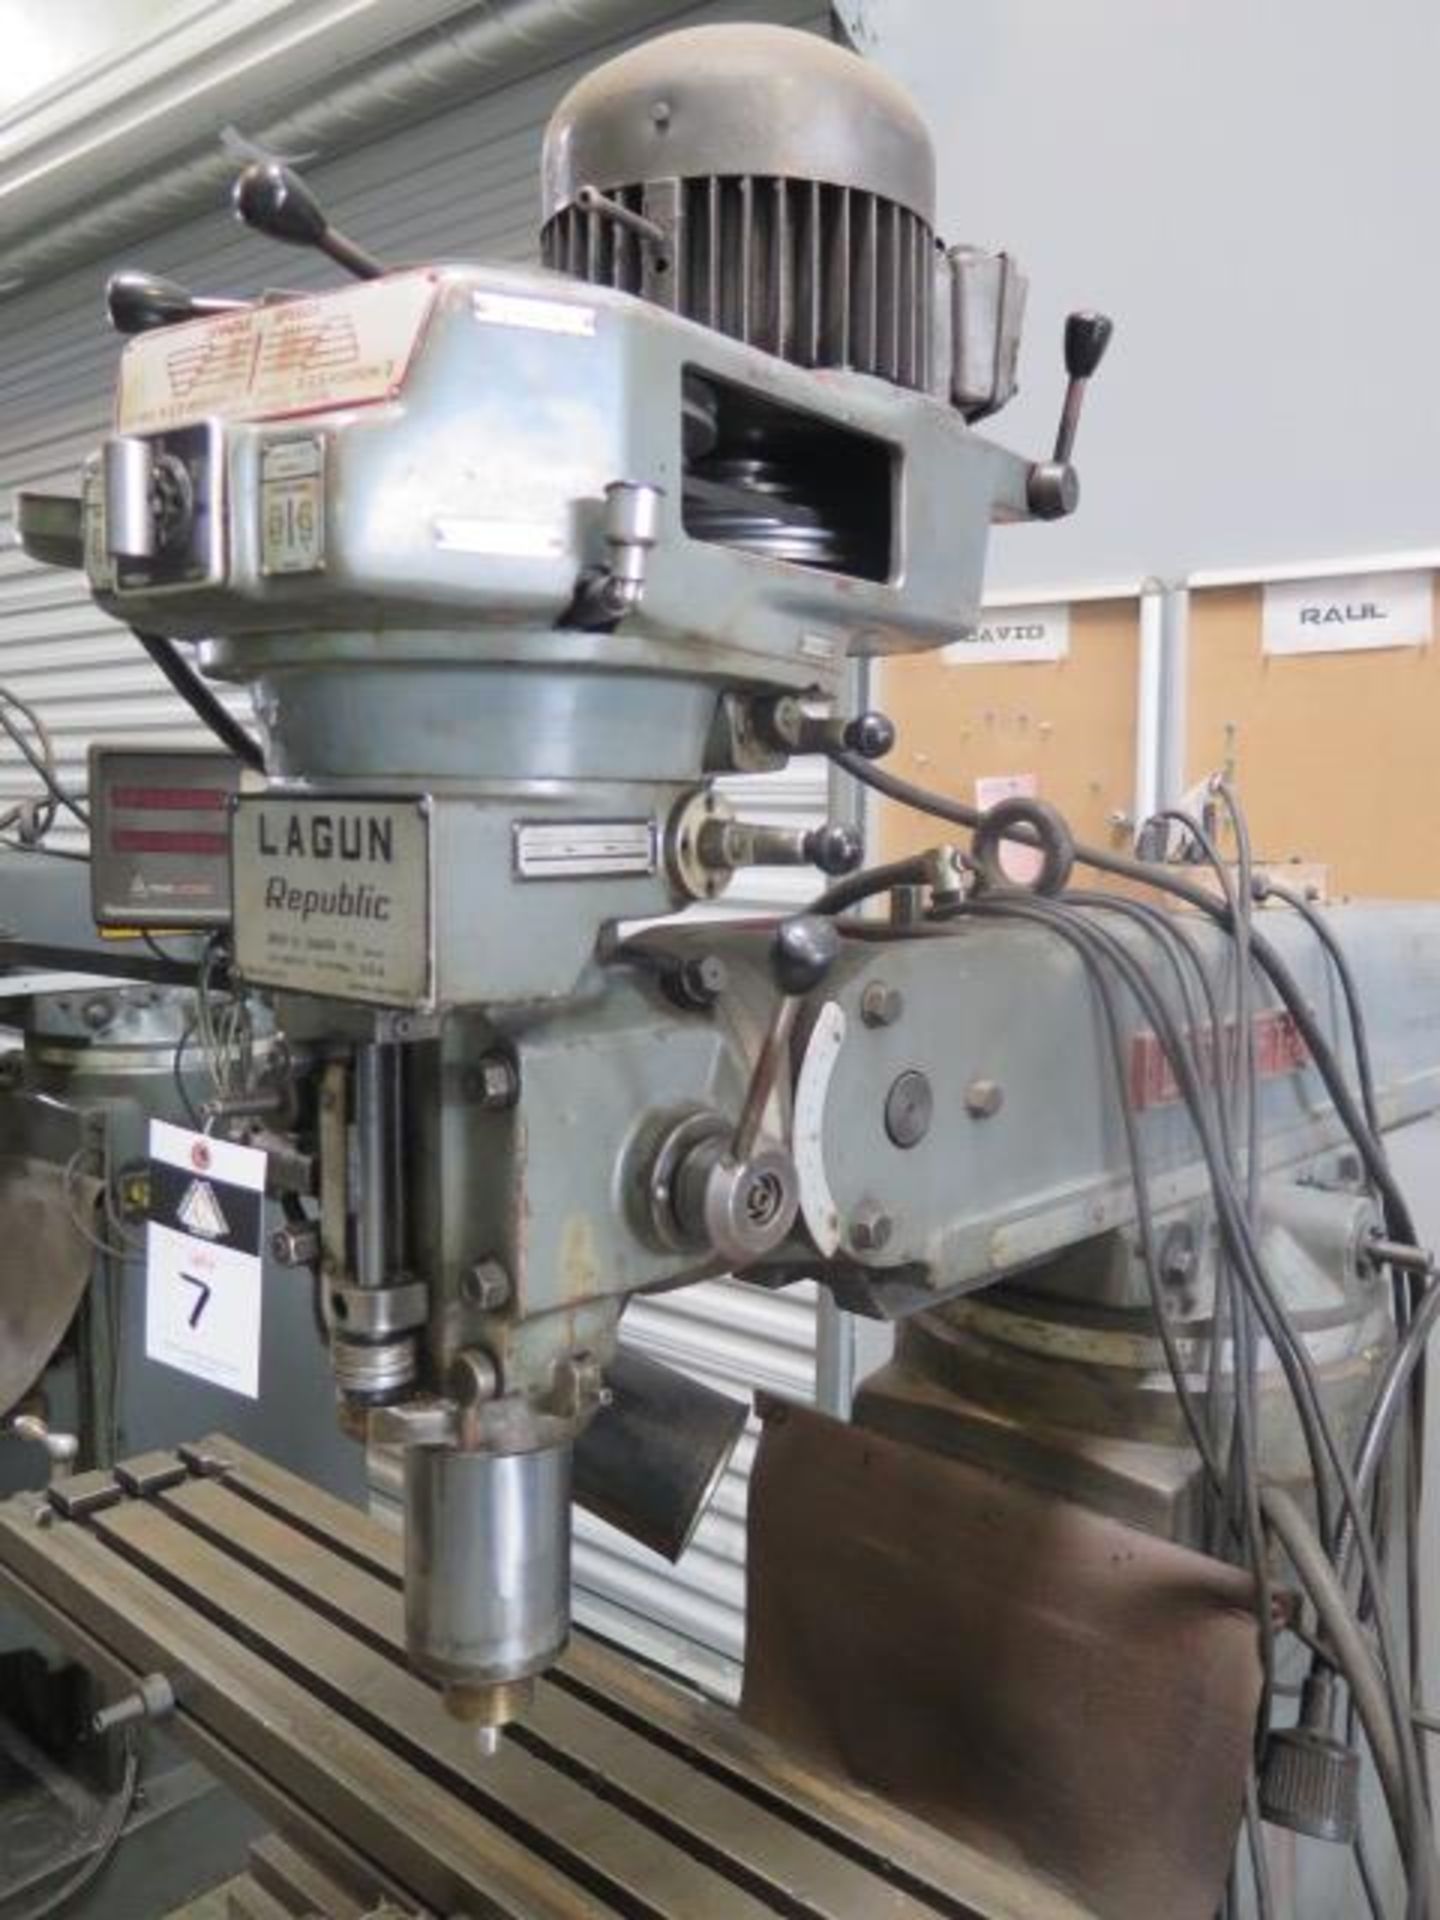 Lagun FT-2 Vertical Mill w/ 55-2940 RPM, 8-Speeds, Chrome Ways, Power Feed, 9” x 48” SOLD AS IS - Image 4 of 10